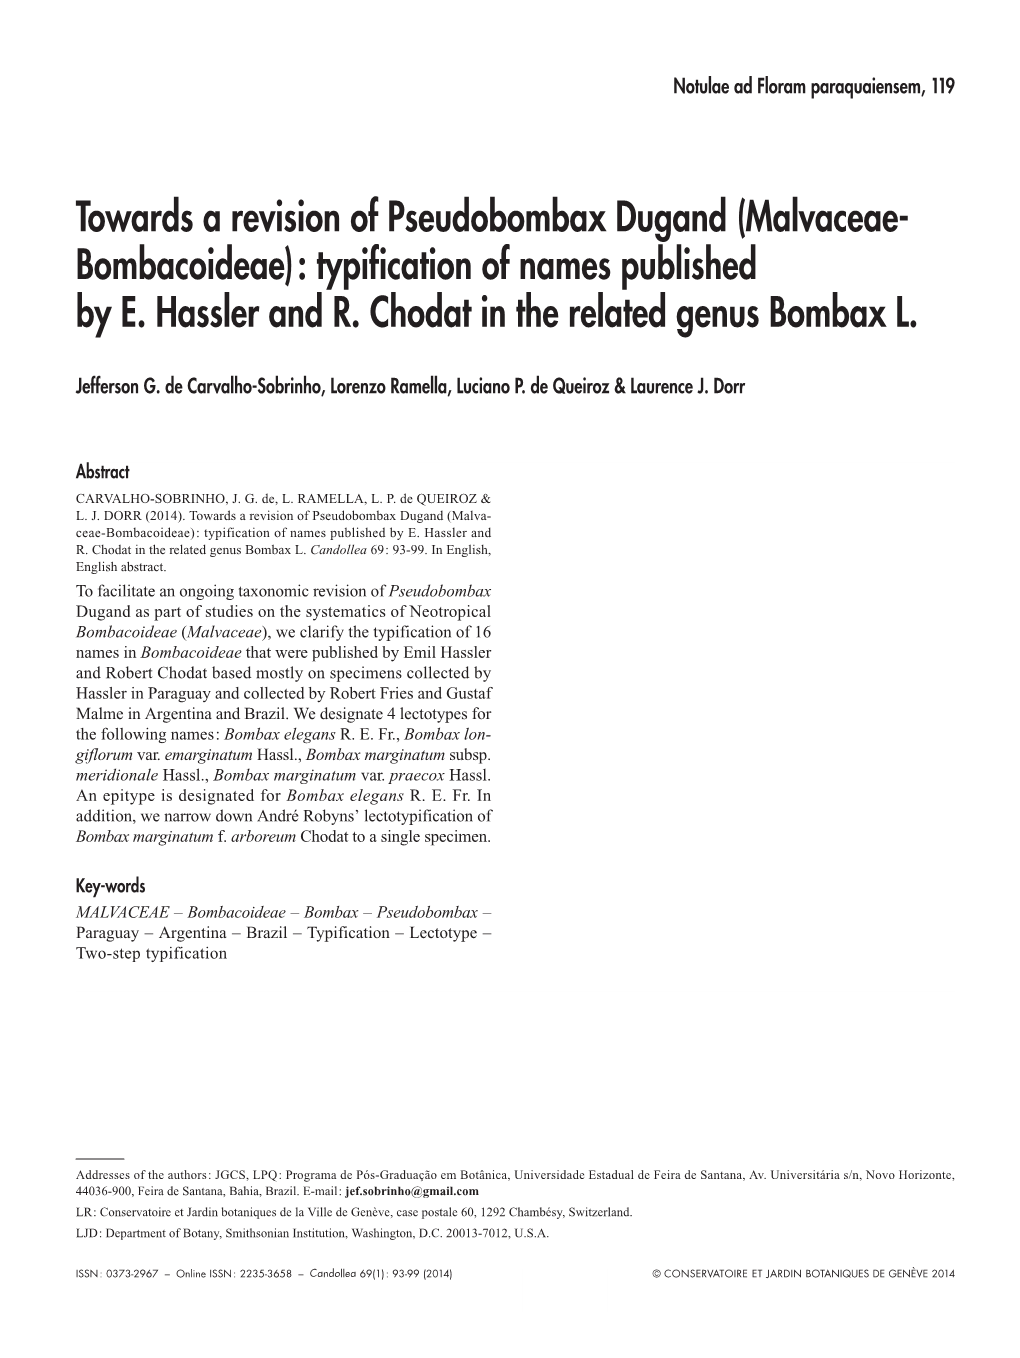 Towards a Revision of Pseudobombax Dugand (Malvaceae- Bombacoideae): Typification of Names Published by E